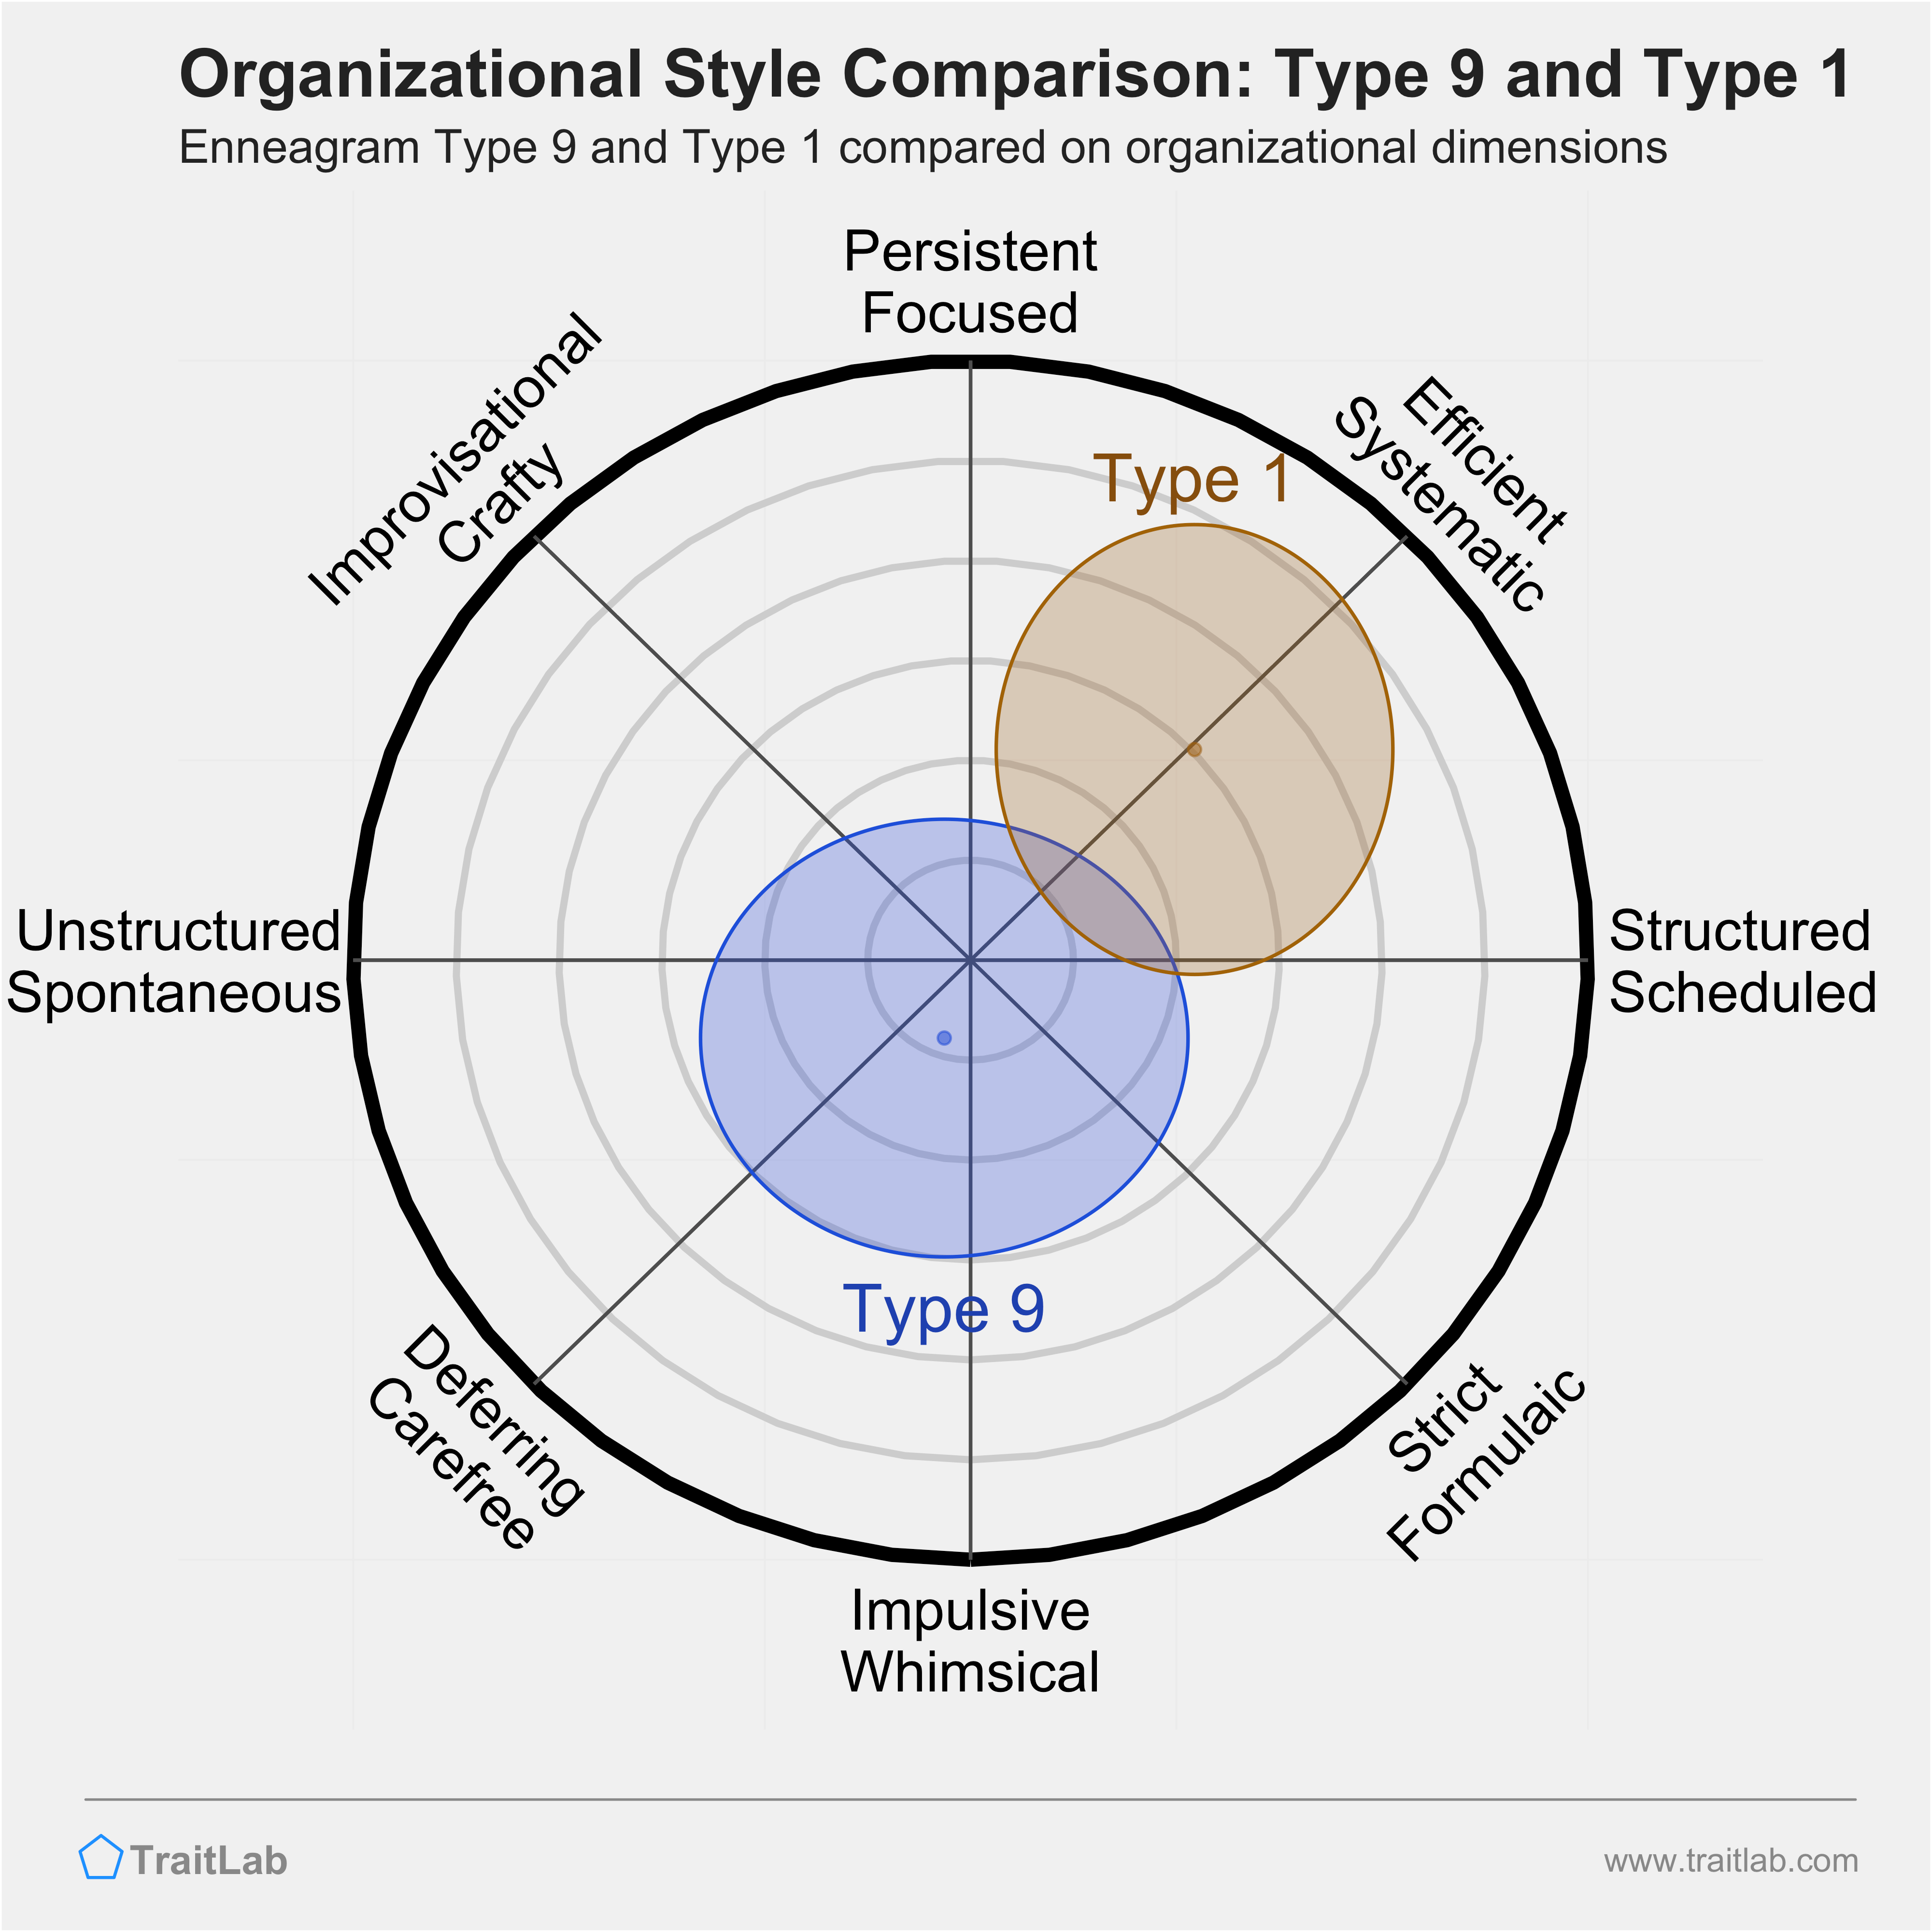 Type 9 and Type 1 comparison across organizational dimensions